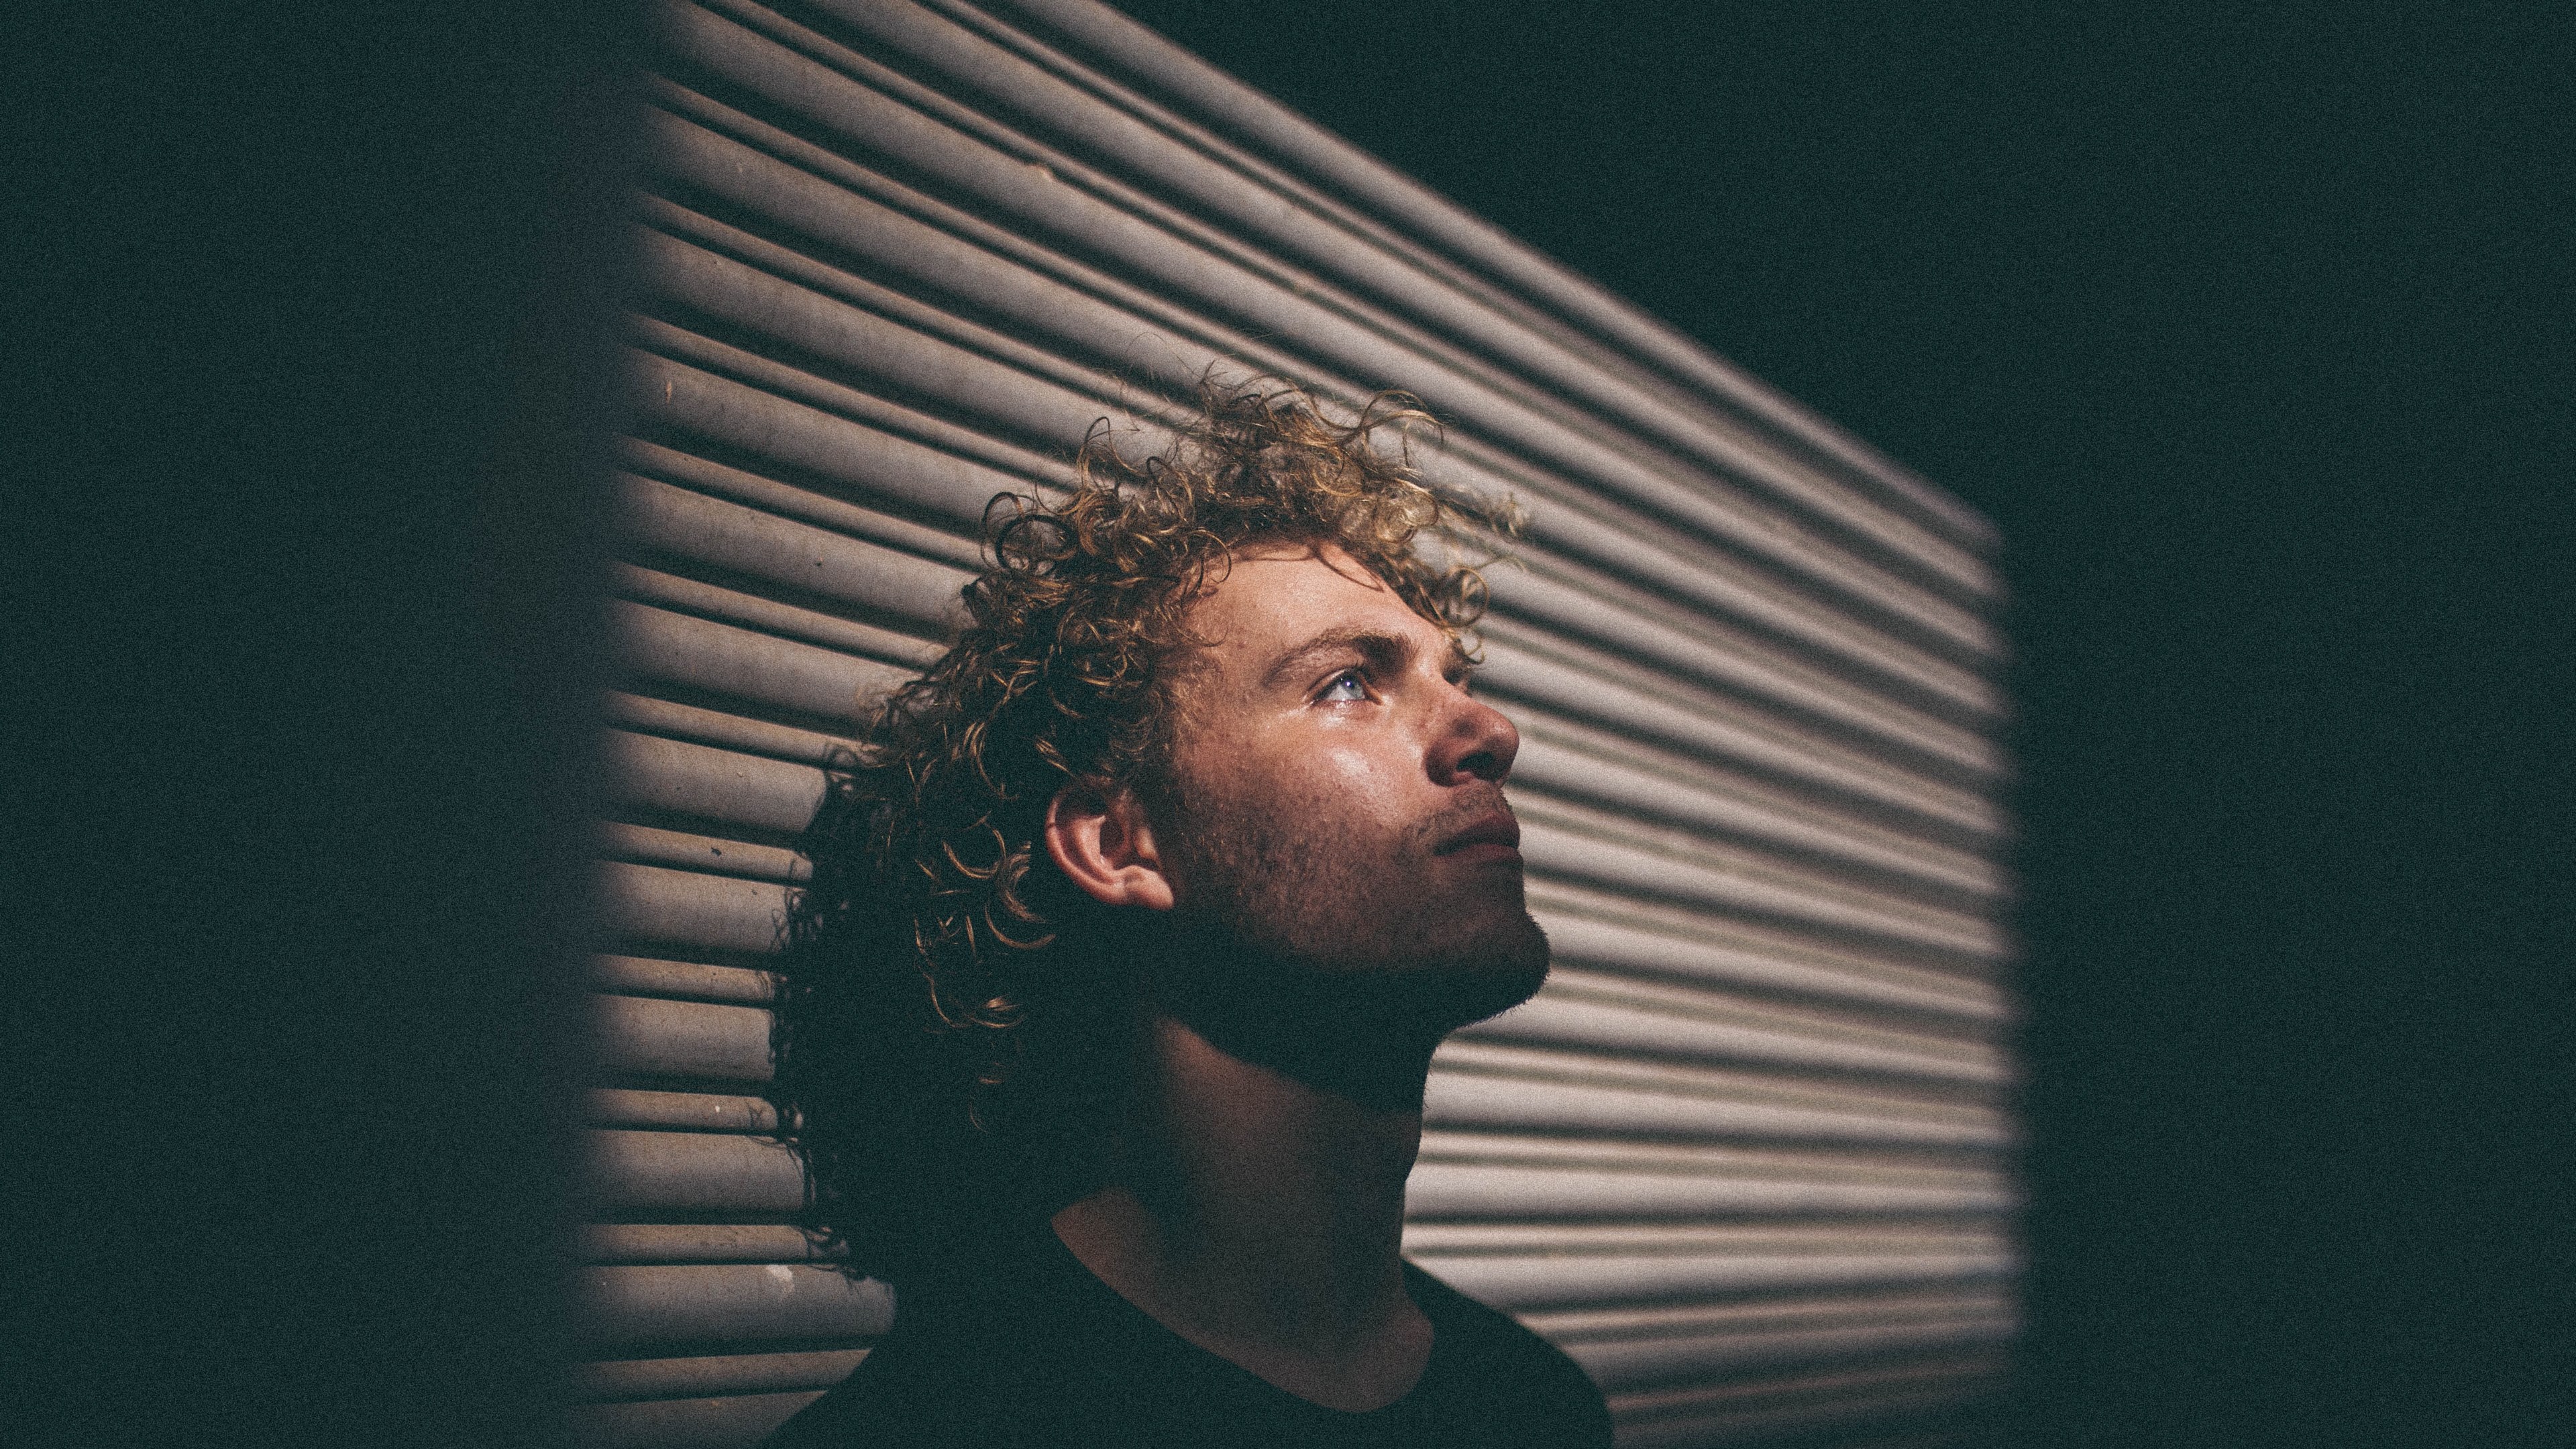 Wallpaper / a man with curly hair in shadow leans his head back against a wall, man leaning head on wall 4k wallpaper free download